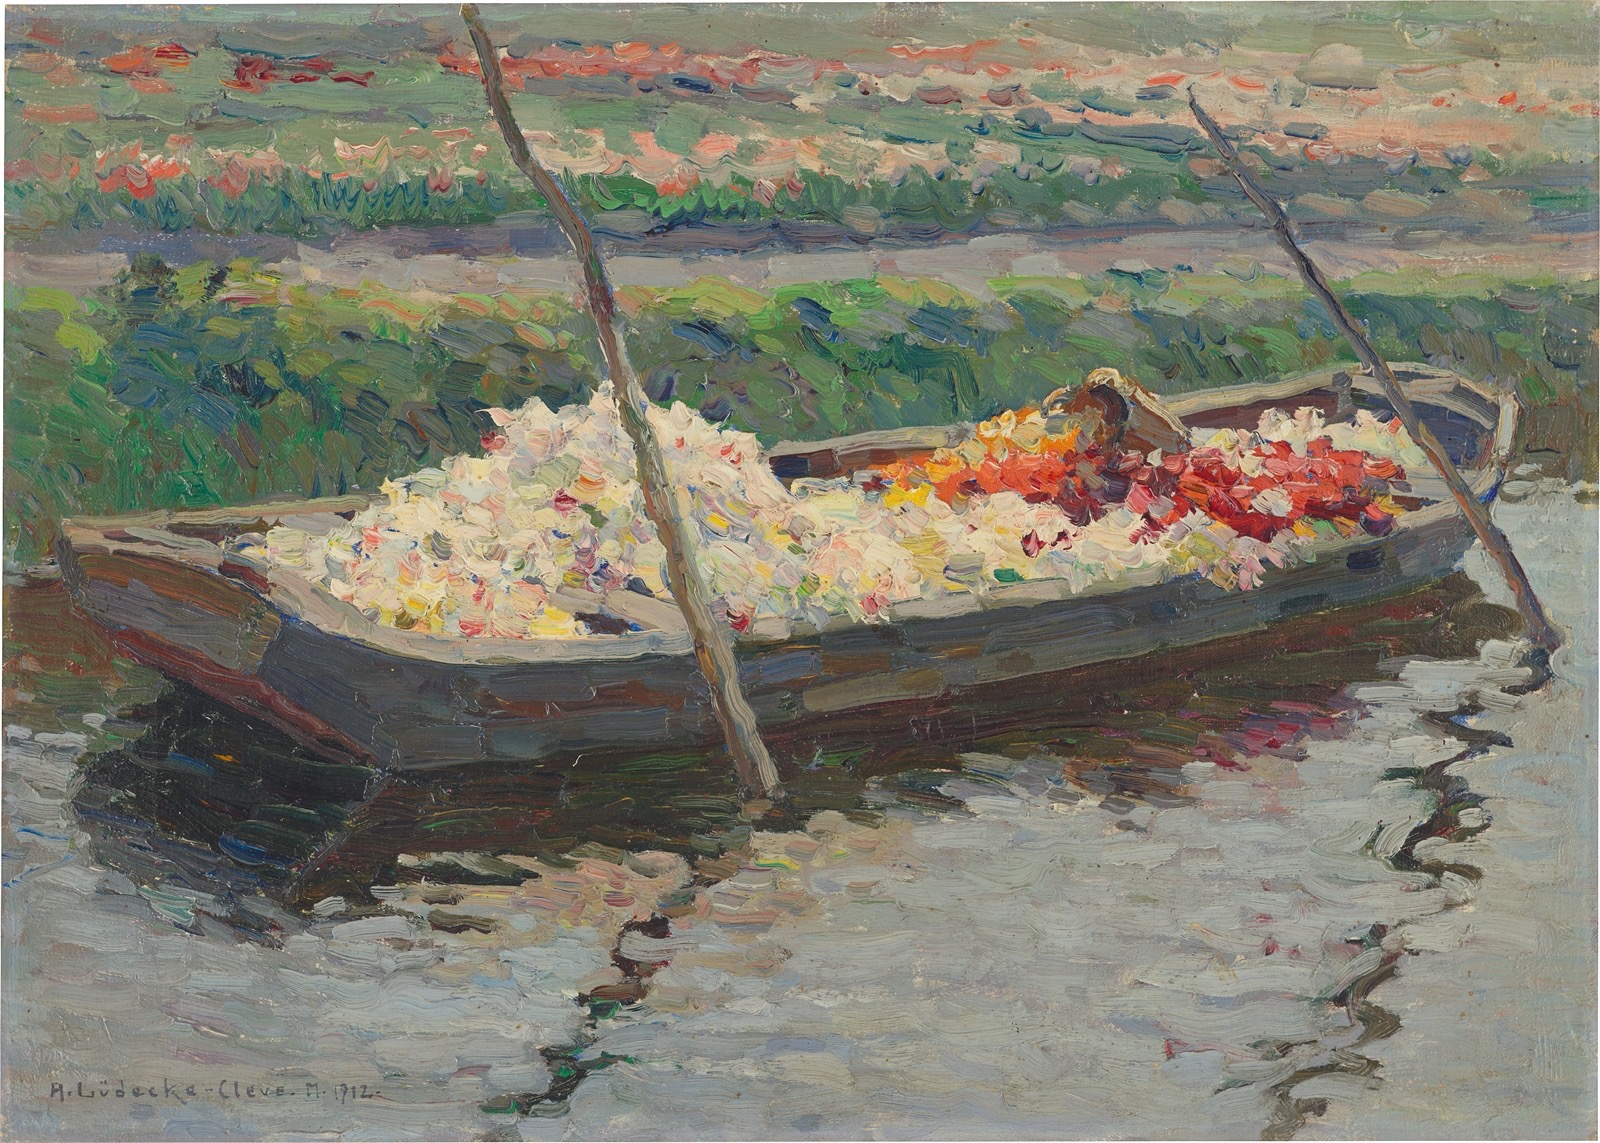 August Lüdecke-Cleve. Boat with flowers. 1912